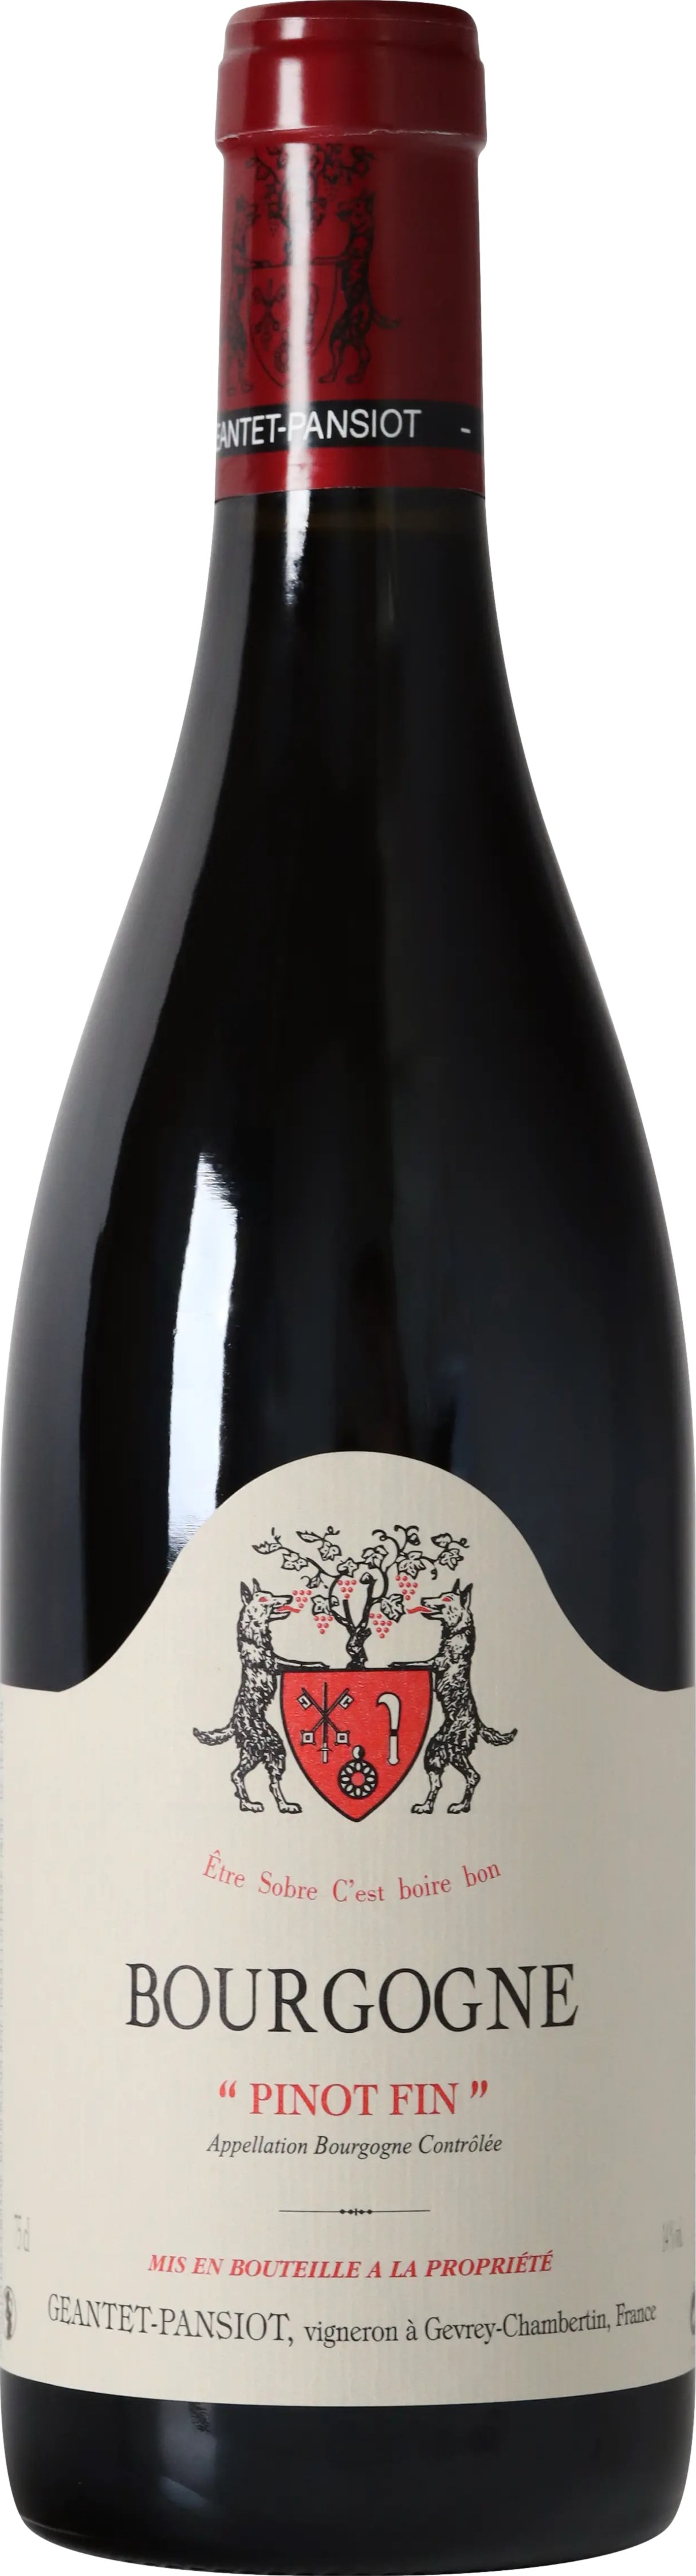 Product image of Geantet-Pansiot Bourgogne Pinot Fin 2021 from 8wines